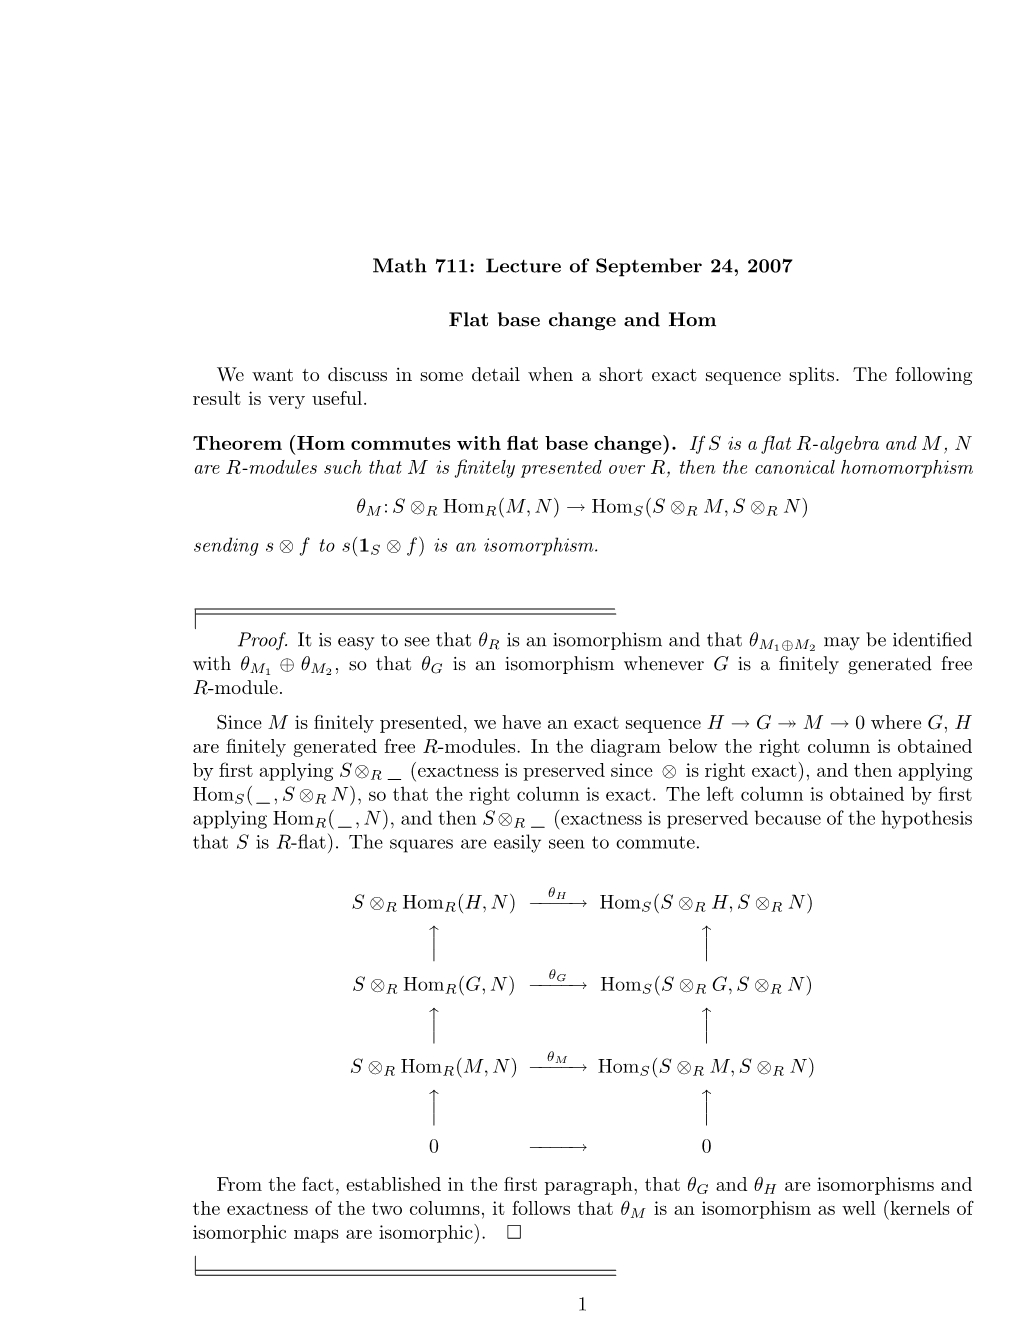 Math 711: Lecture of September 24, 2007 Flat Base Change and Hom